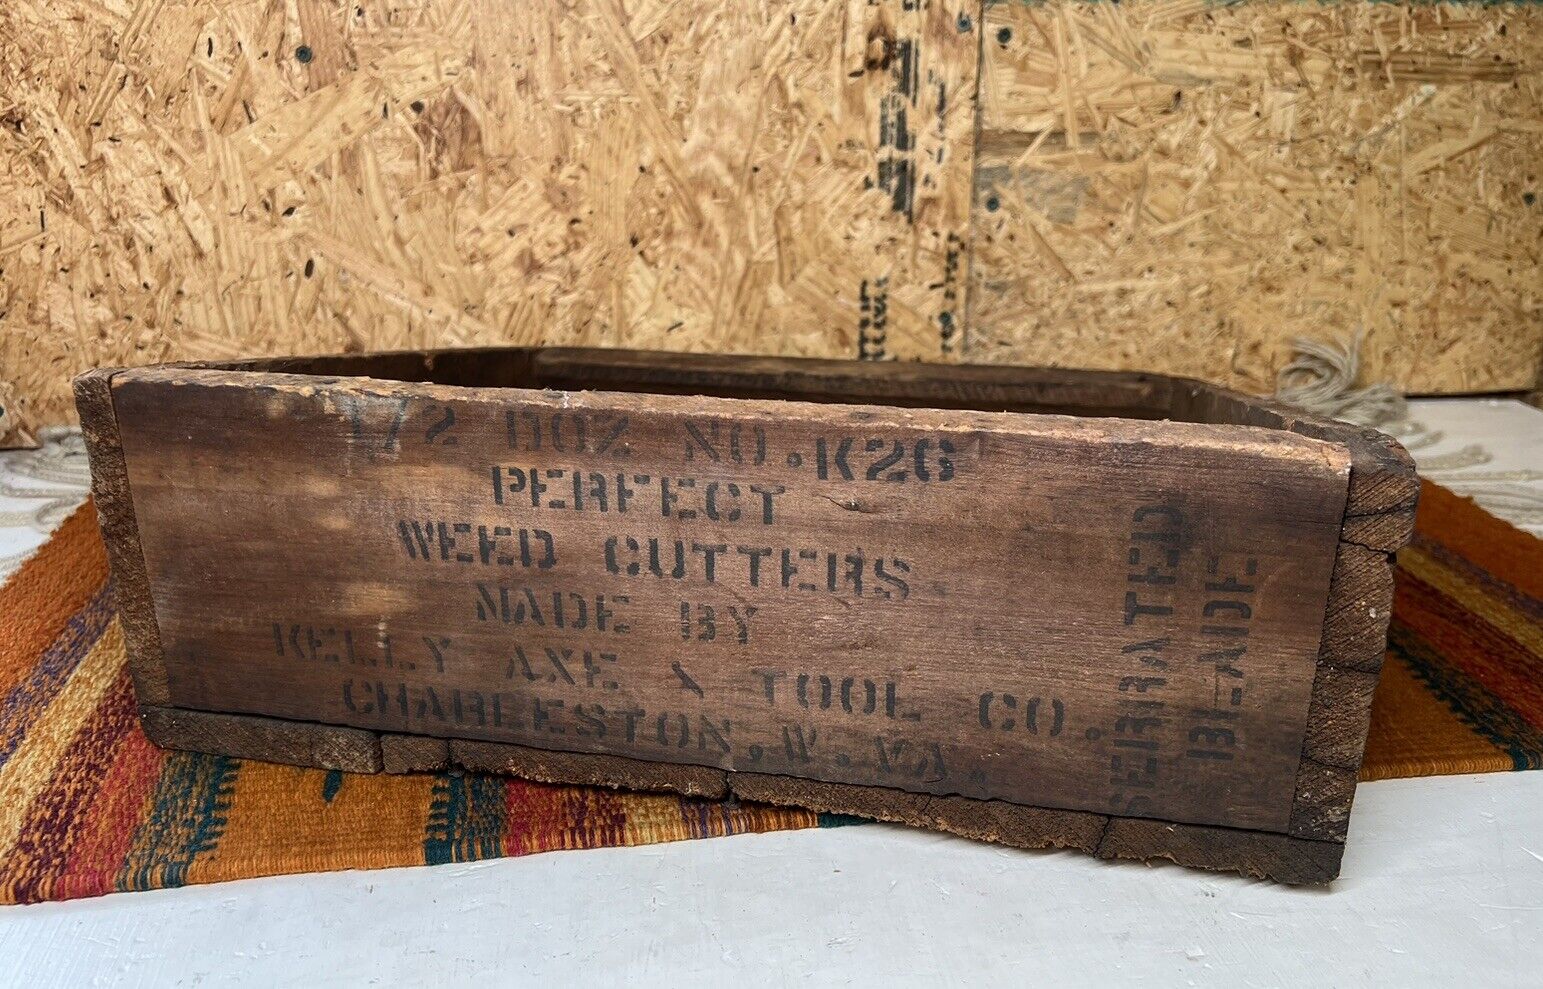 RARE Kelly Axe & Tool Co. Weed Cutter Wooden Crate Box Charleston West Virginia